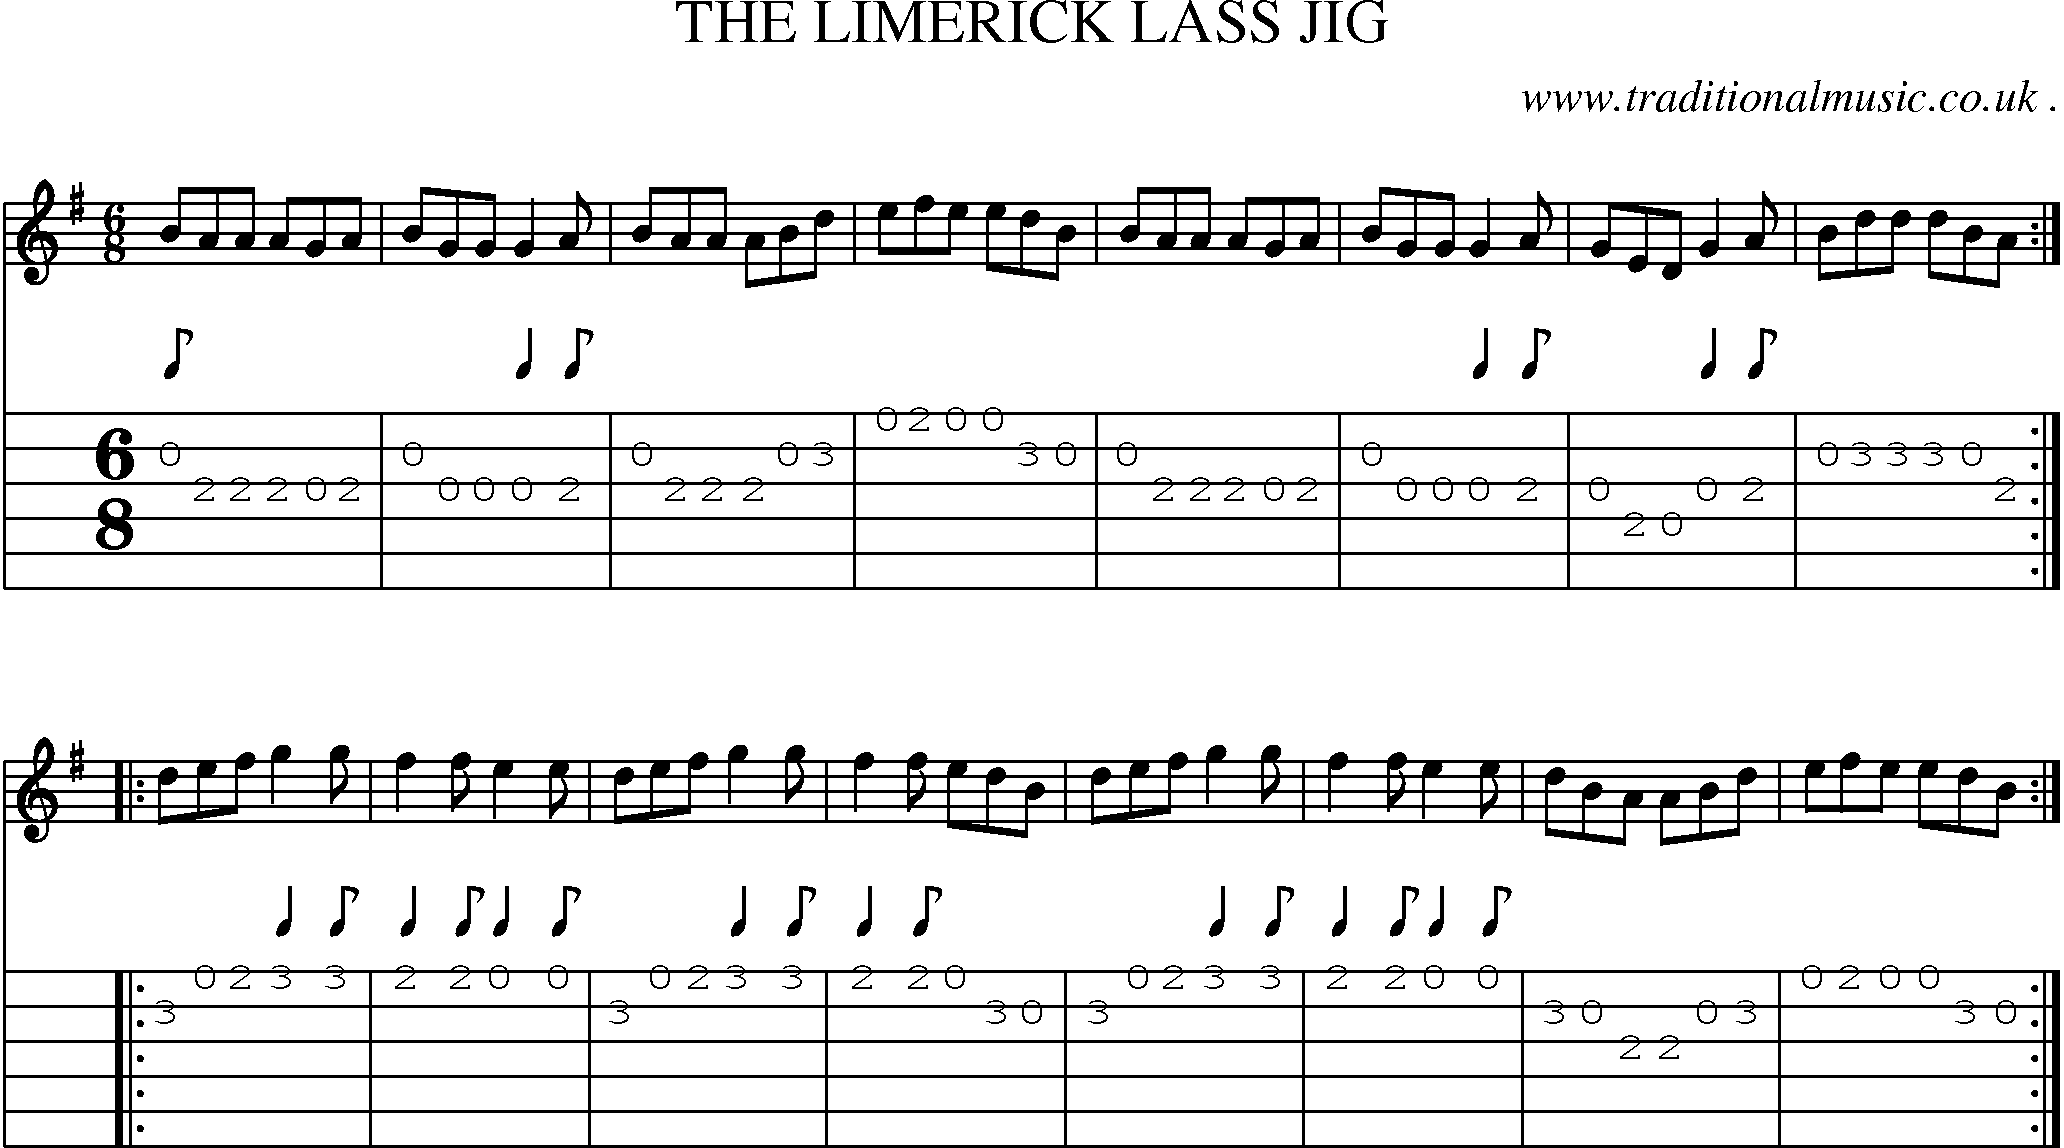 Sheet-Music and Guitar Tabs for The Limerick Lass Jig